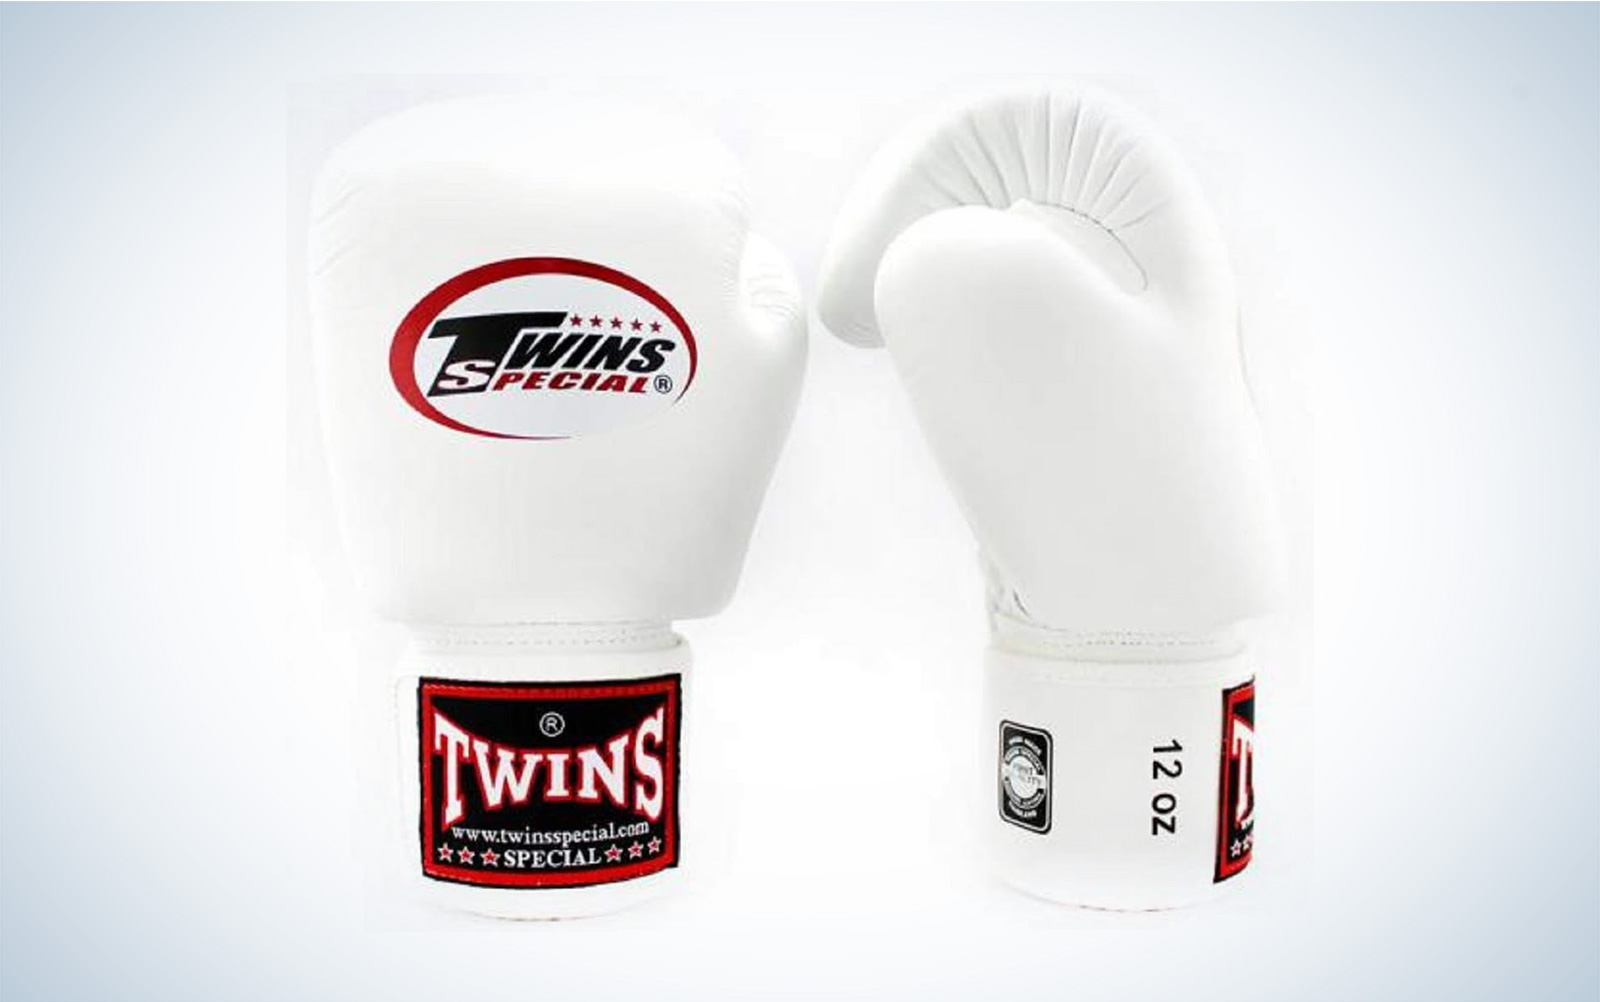 Twins Special boxing gloves are great all around